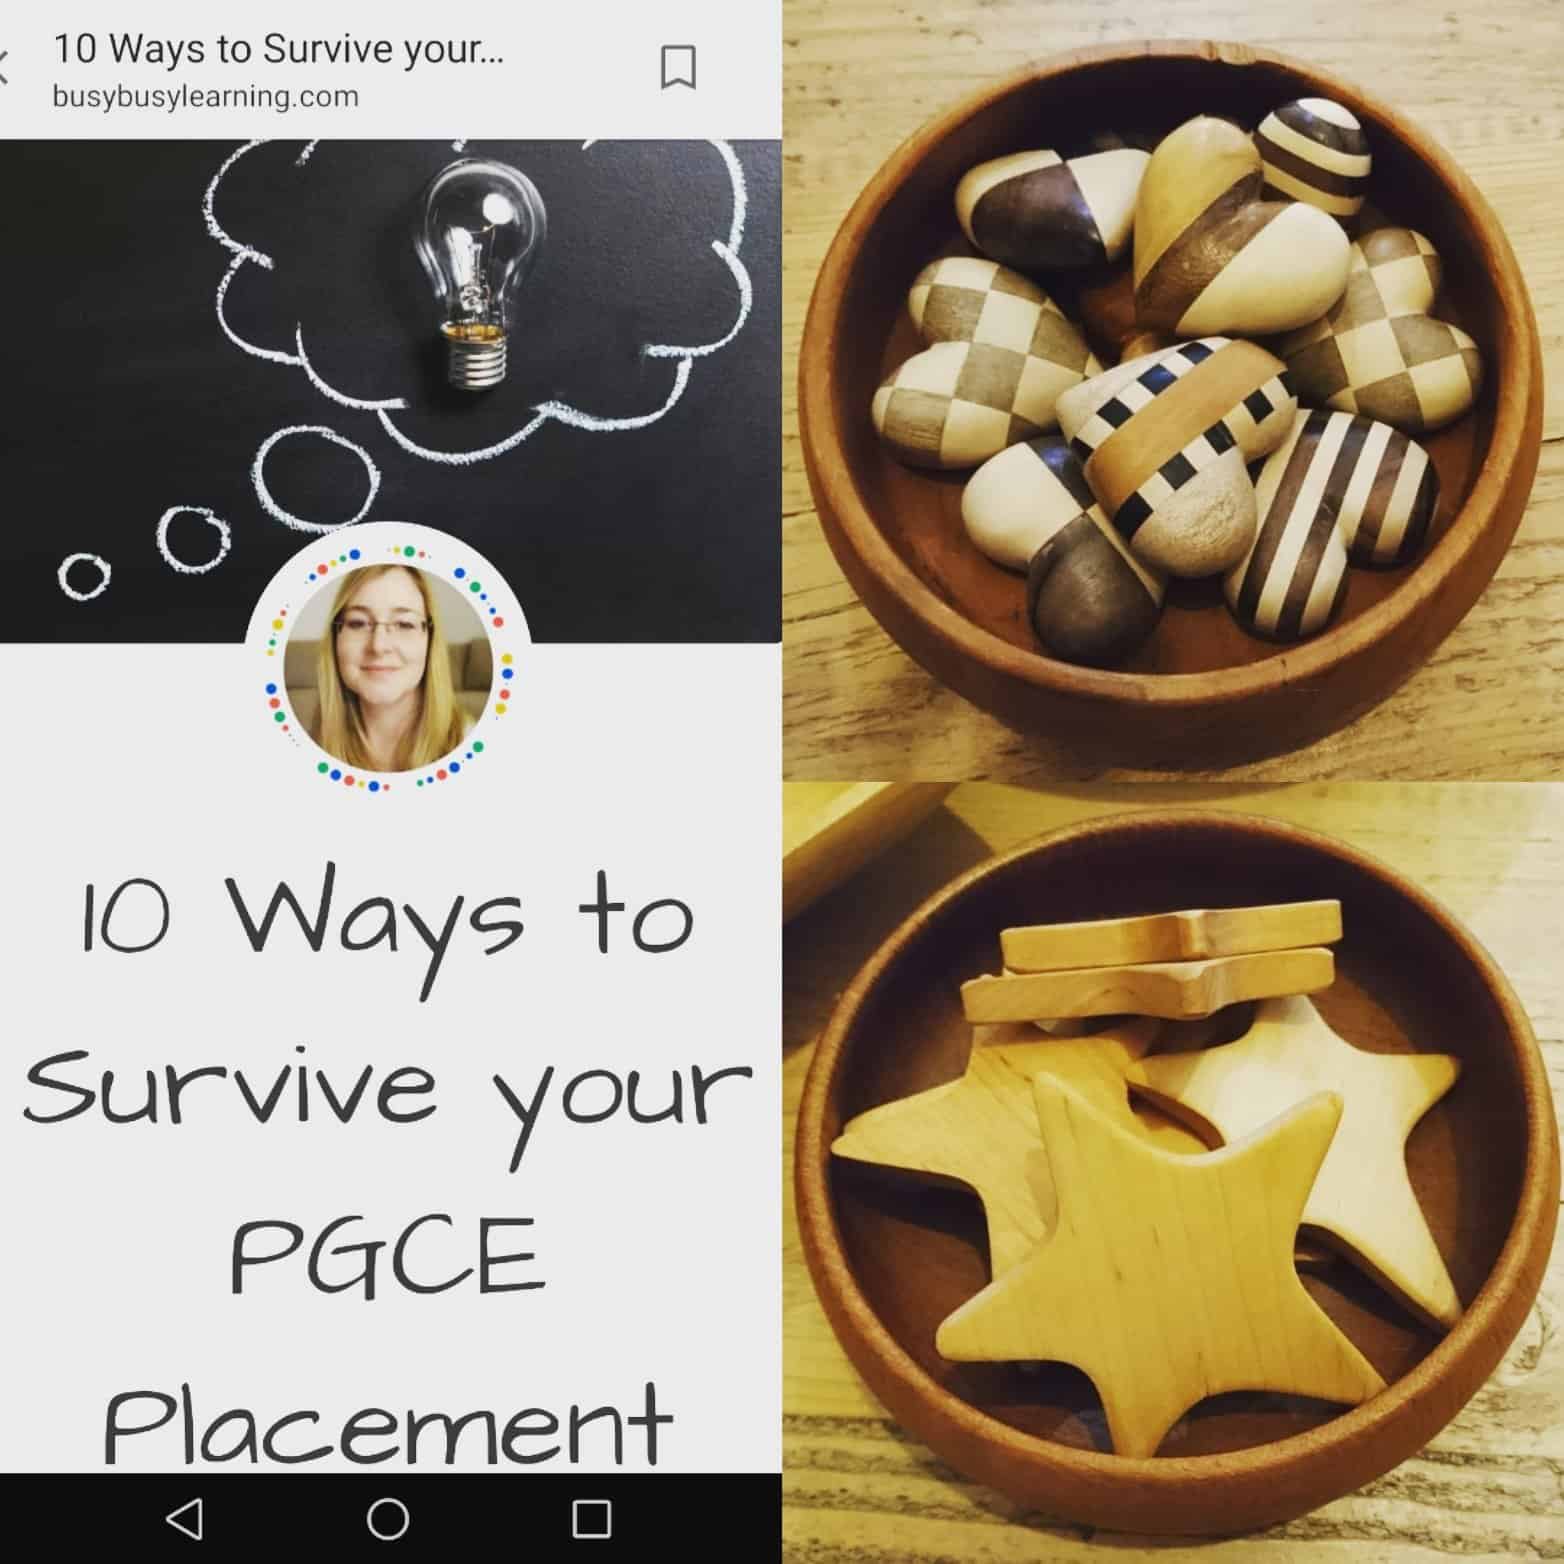 10 Ways to Survive your PGCE Placement Student Teacher